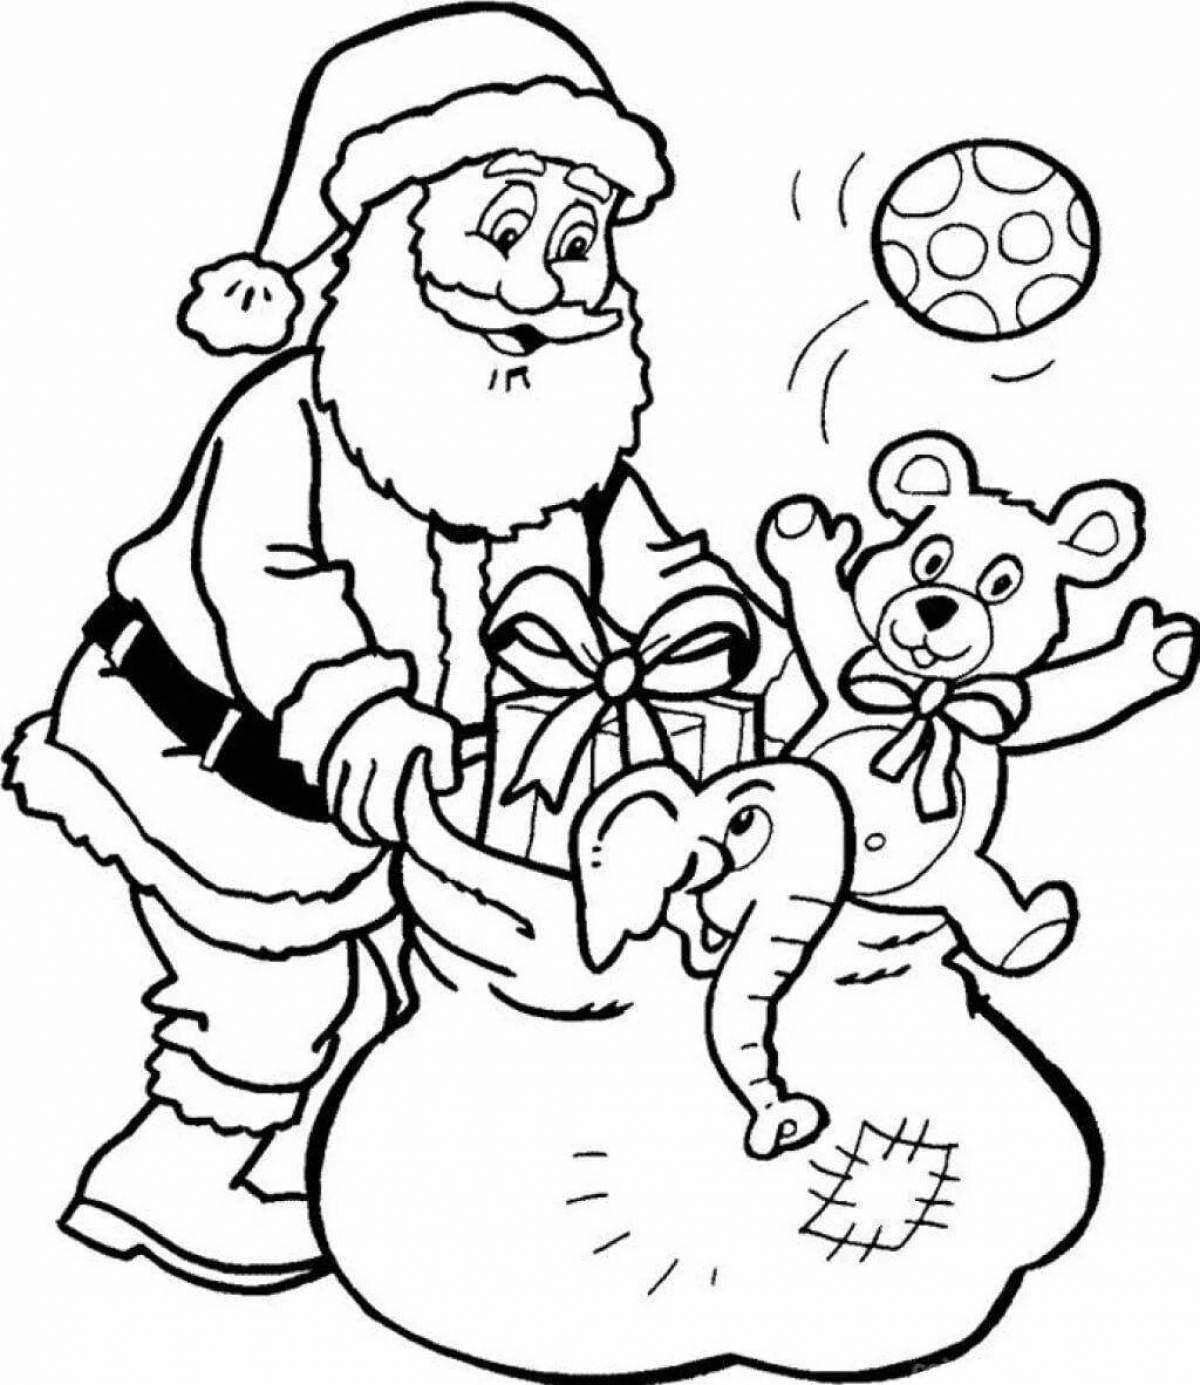 Amazing Santa Claus coloring book for kids